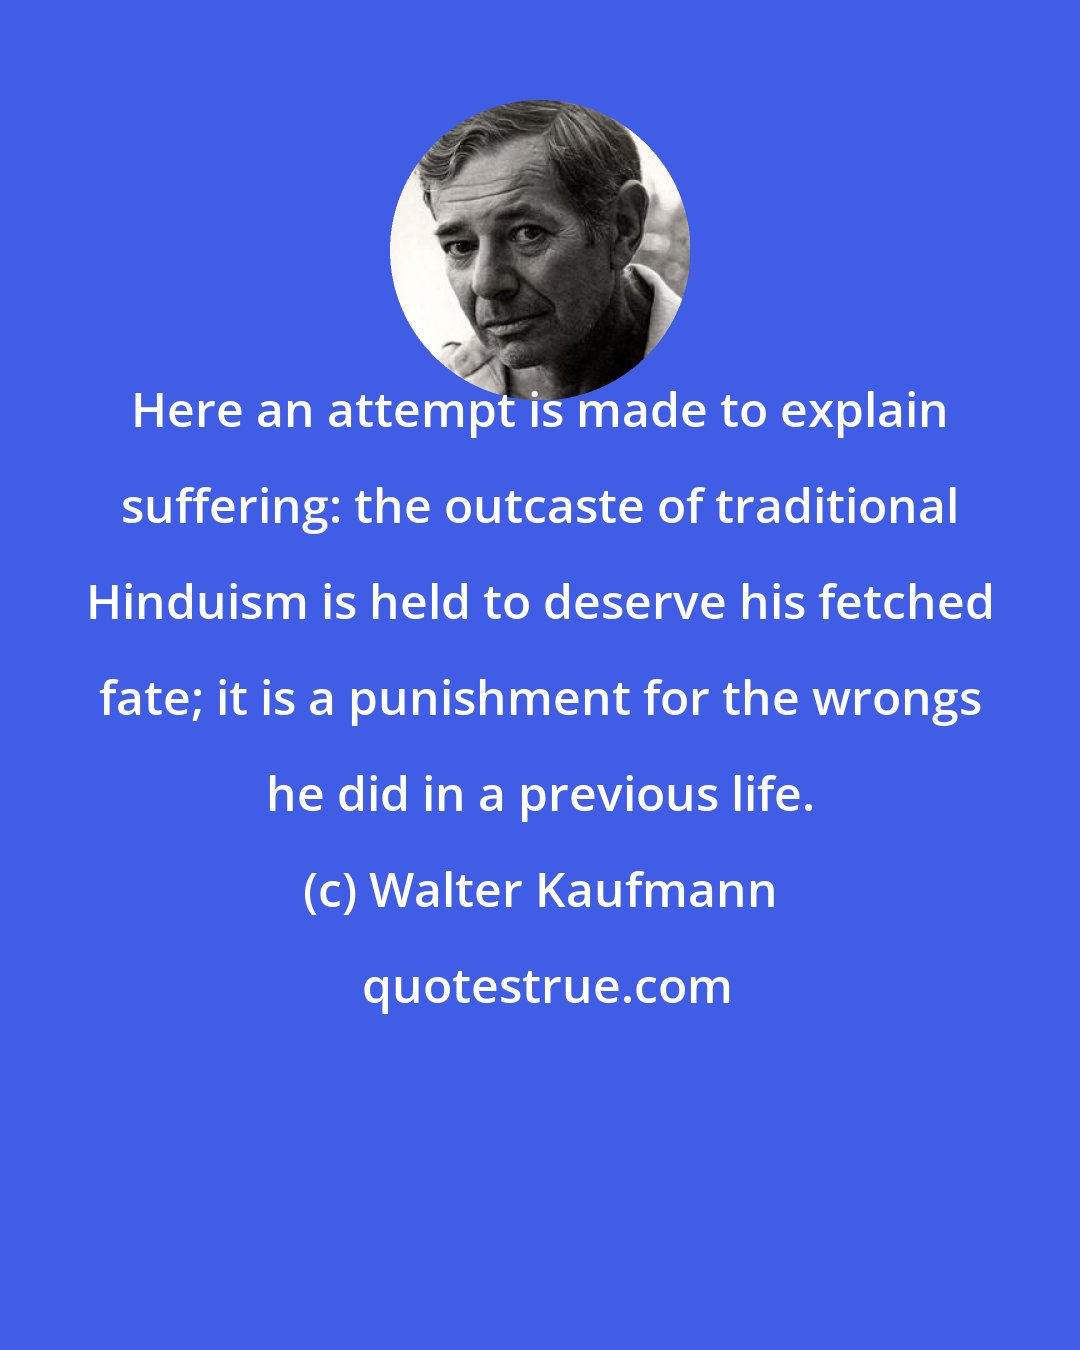 Walter Kaufmann: Here an attempt is made to explain suffering: the outcaste of traditional Hinduism is held to deserve his fetched fate; it is a punishment for the wrongs he did in a previous life.